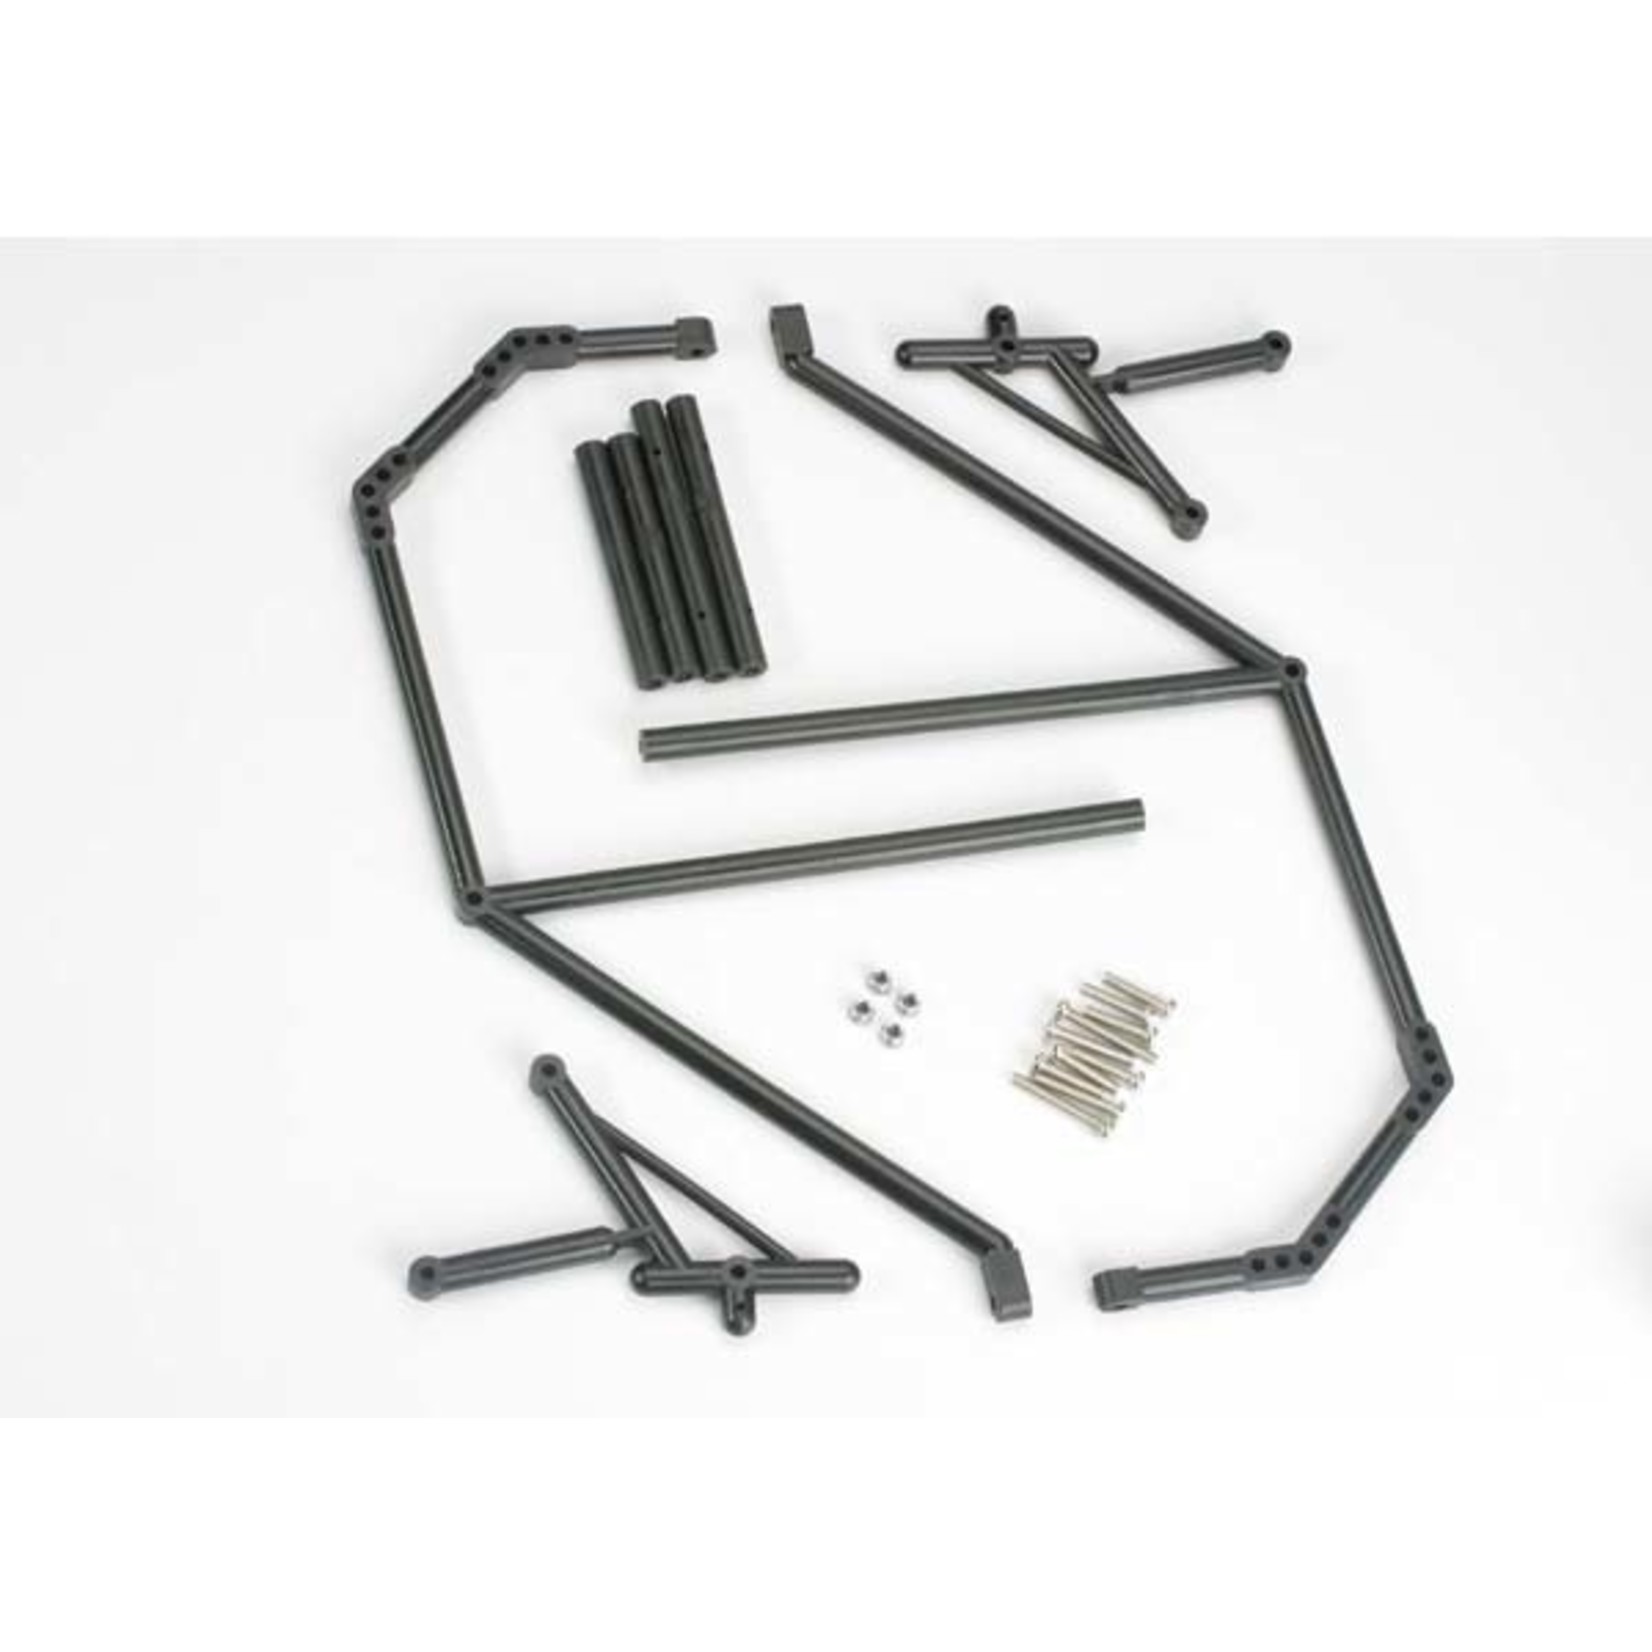 Traxxas 6014 - Roll cage